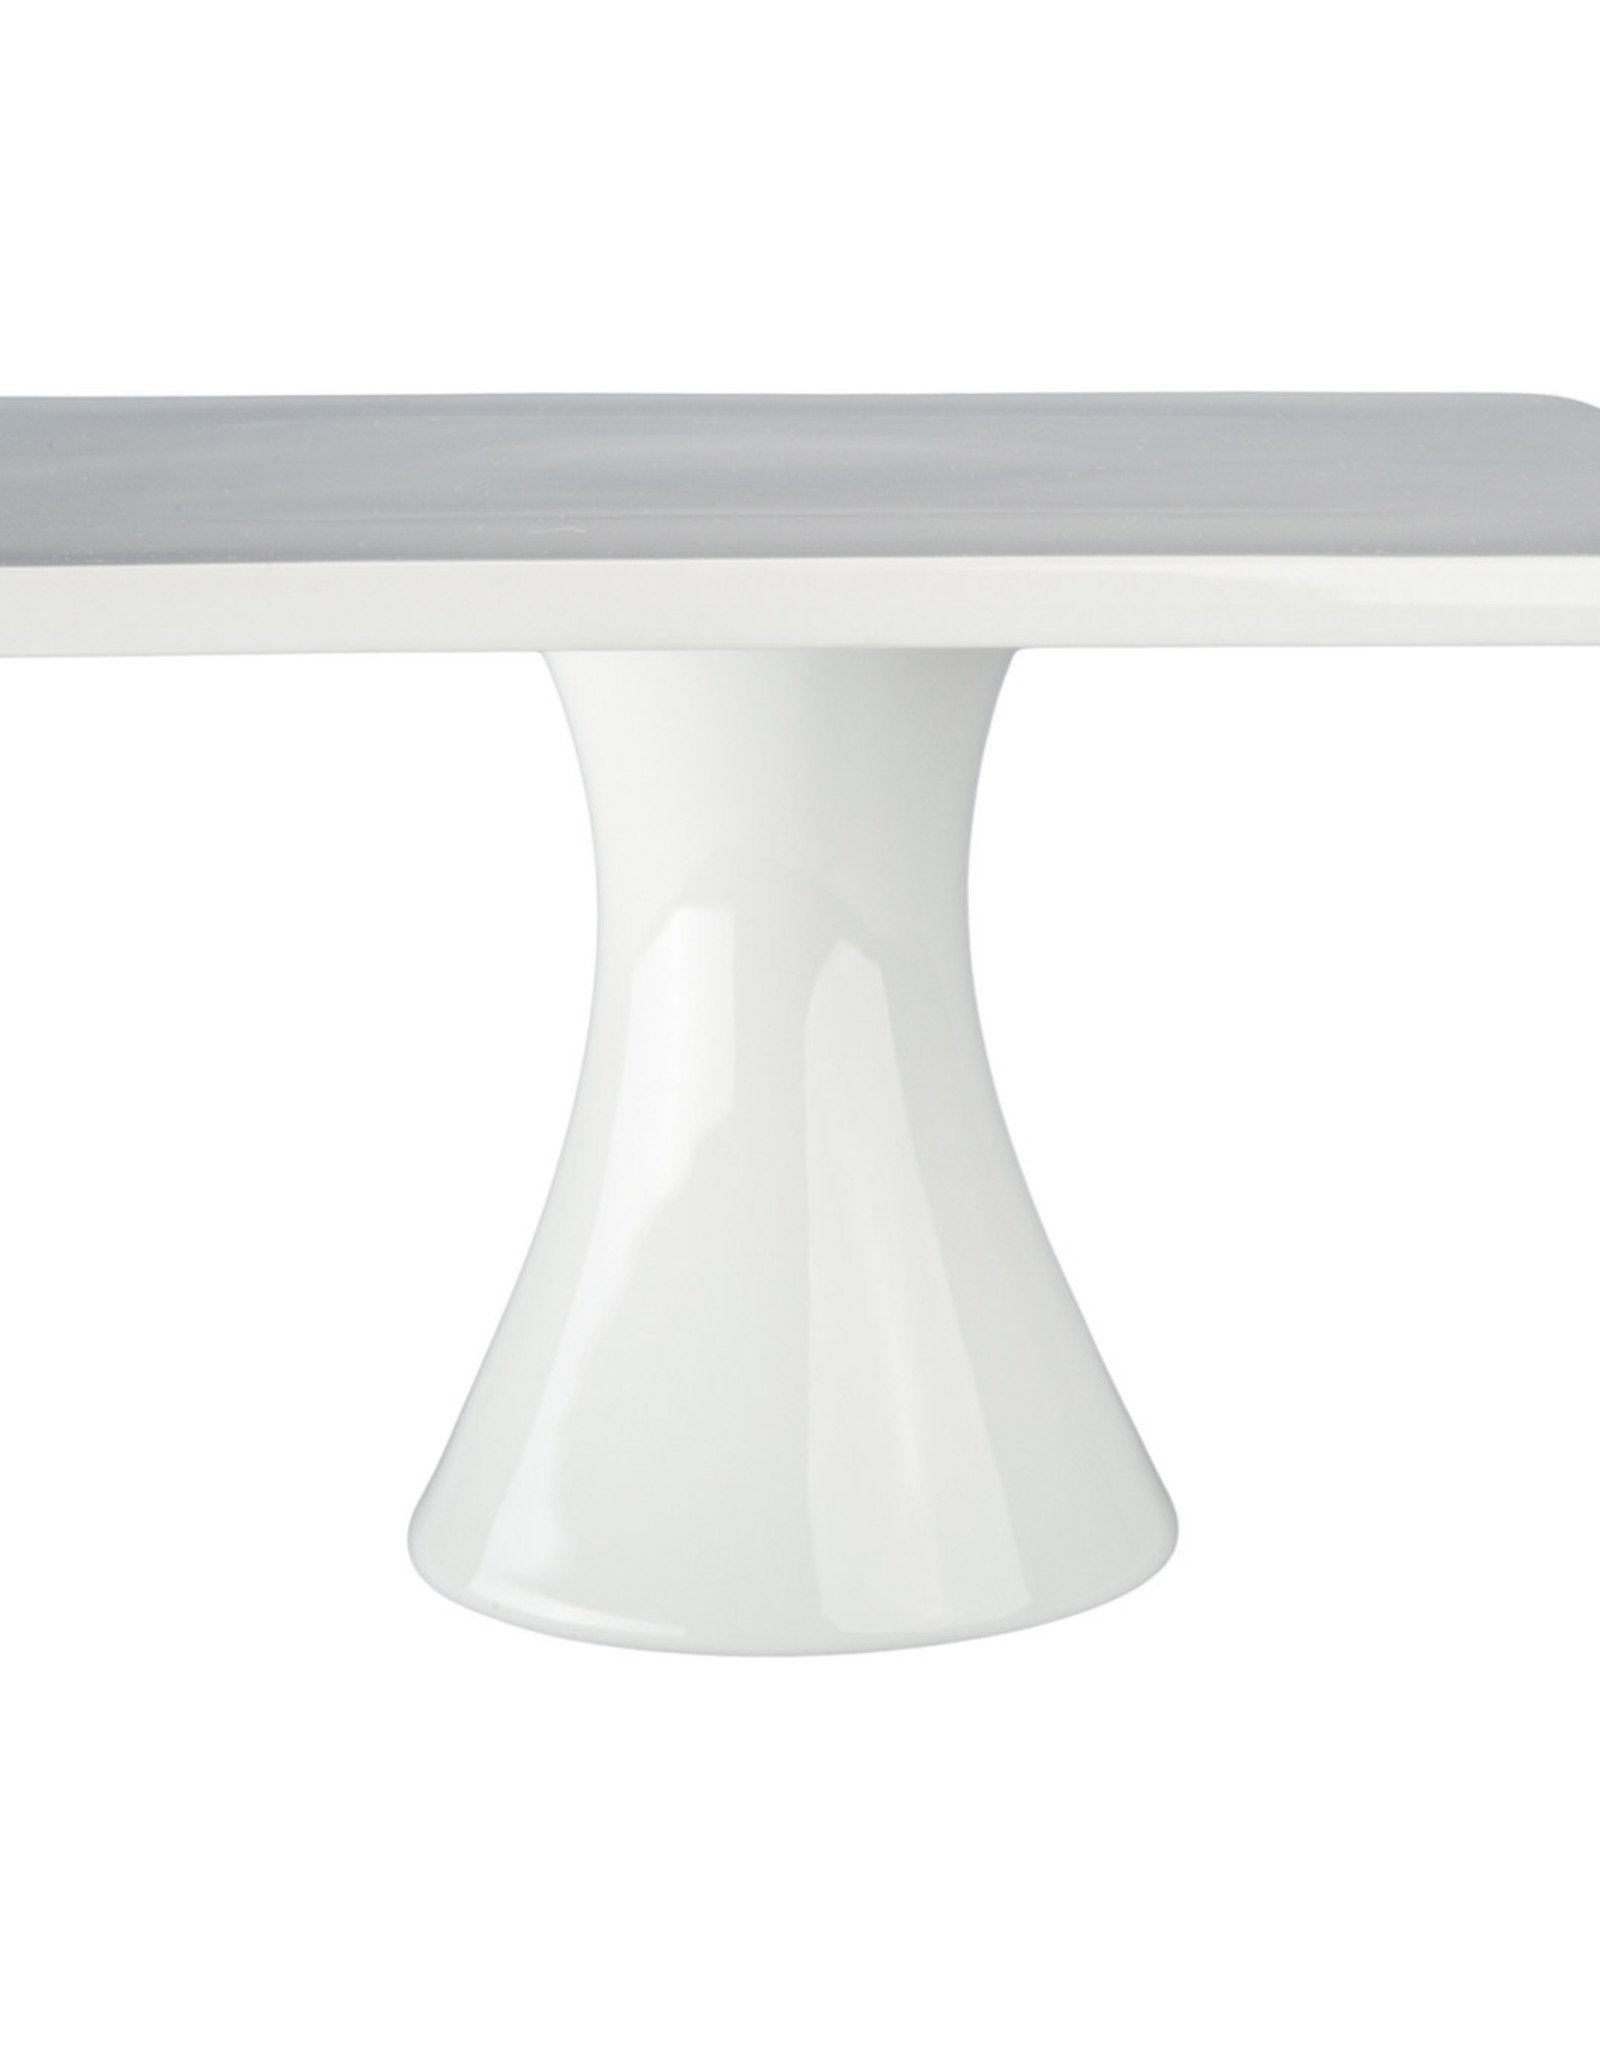 Cake Stand Square Small 11 Inch X 11 Inch X 6.25 Inch